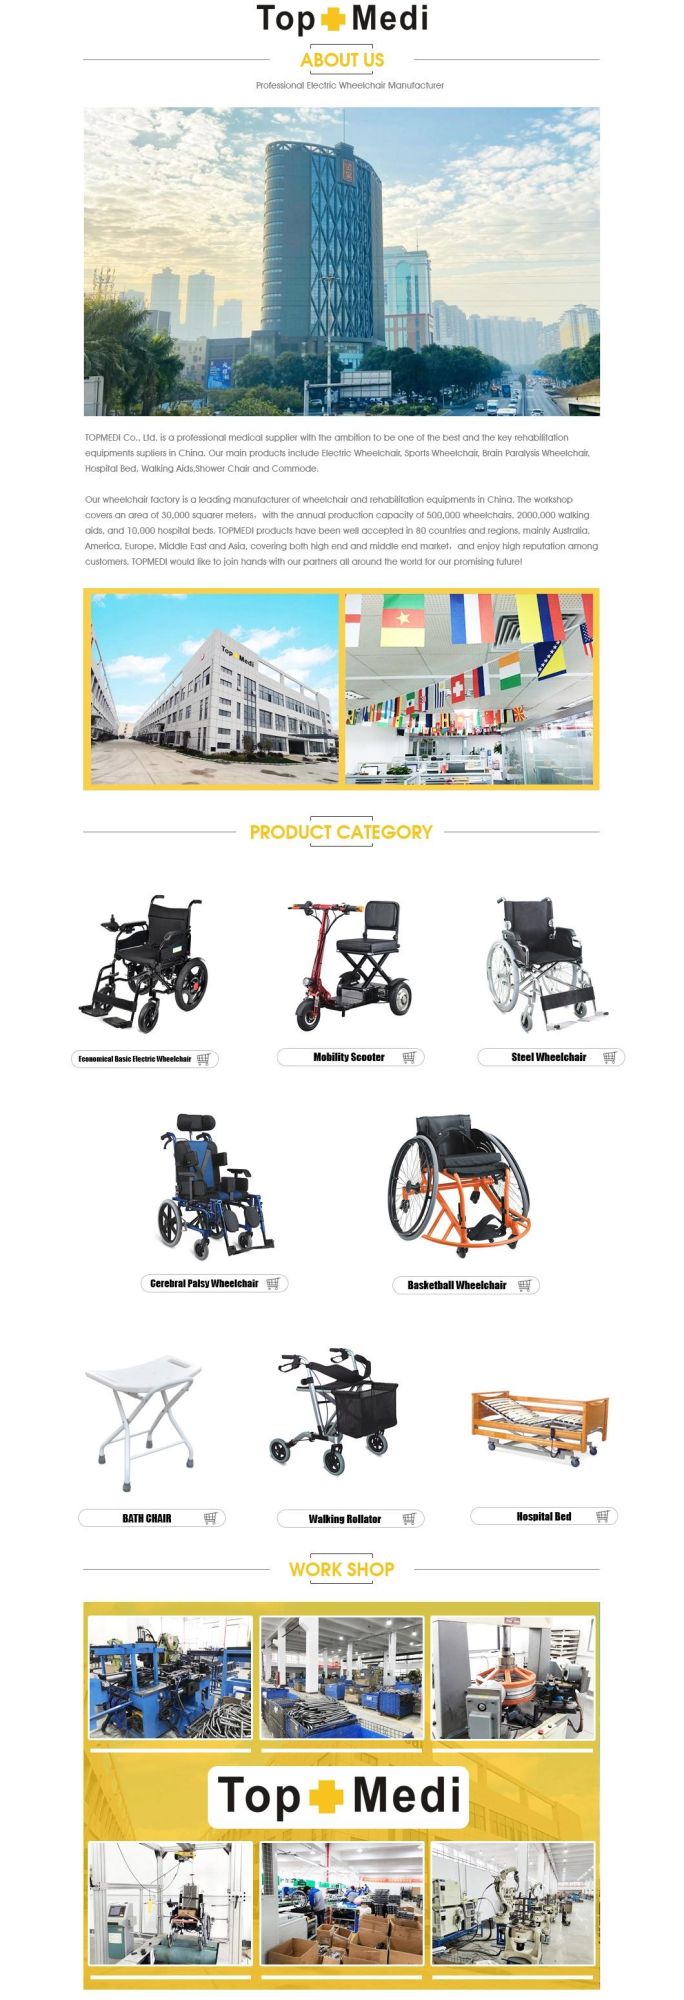 Easy Taken Portable Aluminum Electric Wheelchair for Airplane Using